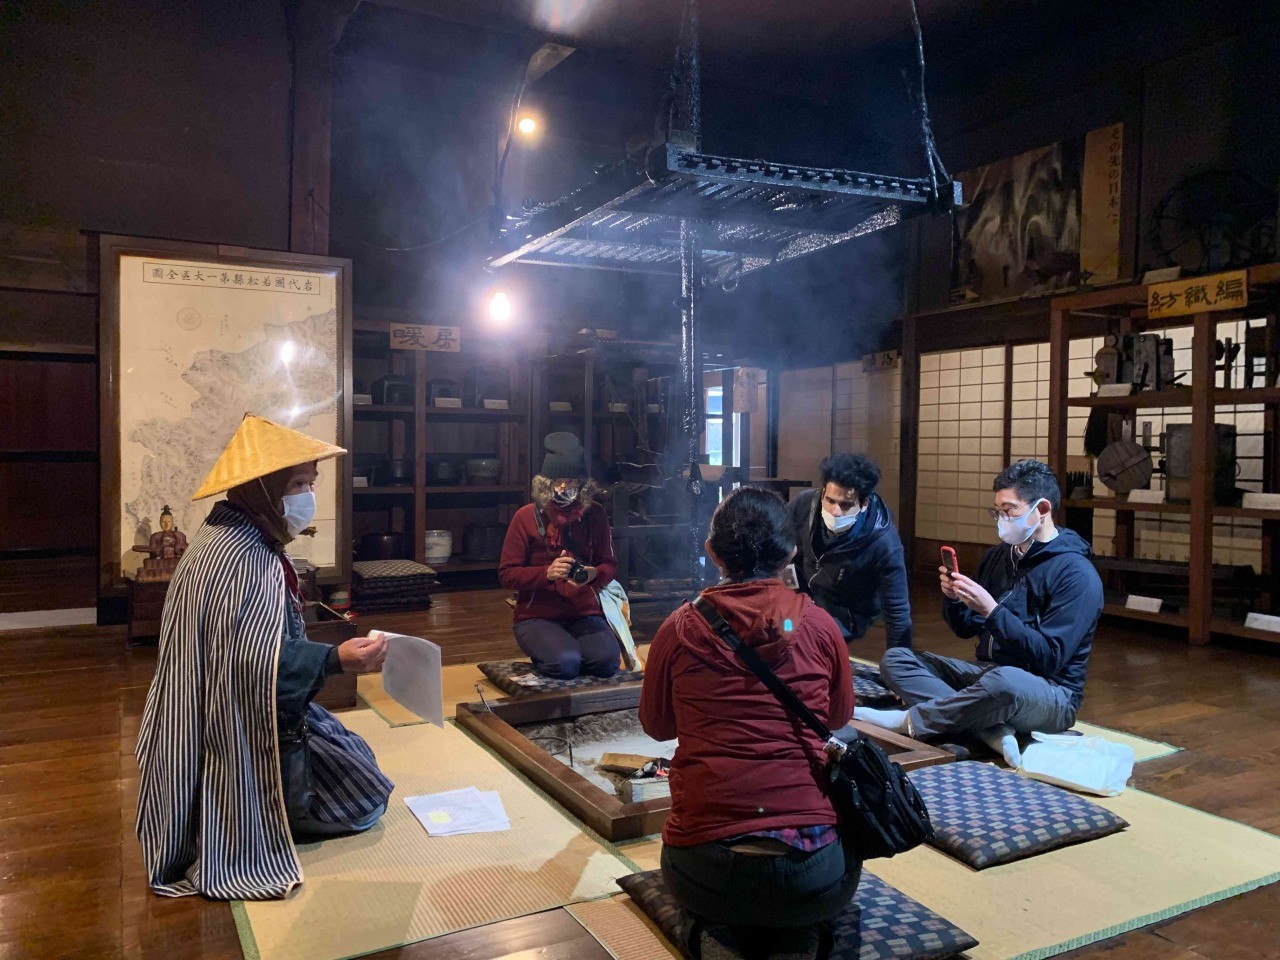 Edo Cultural Spirits experience that was also rooted in the post town